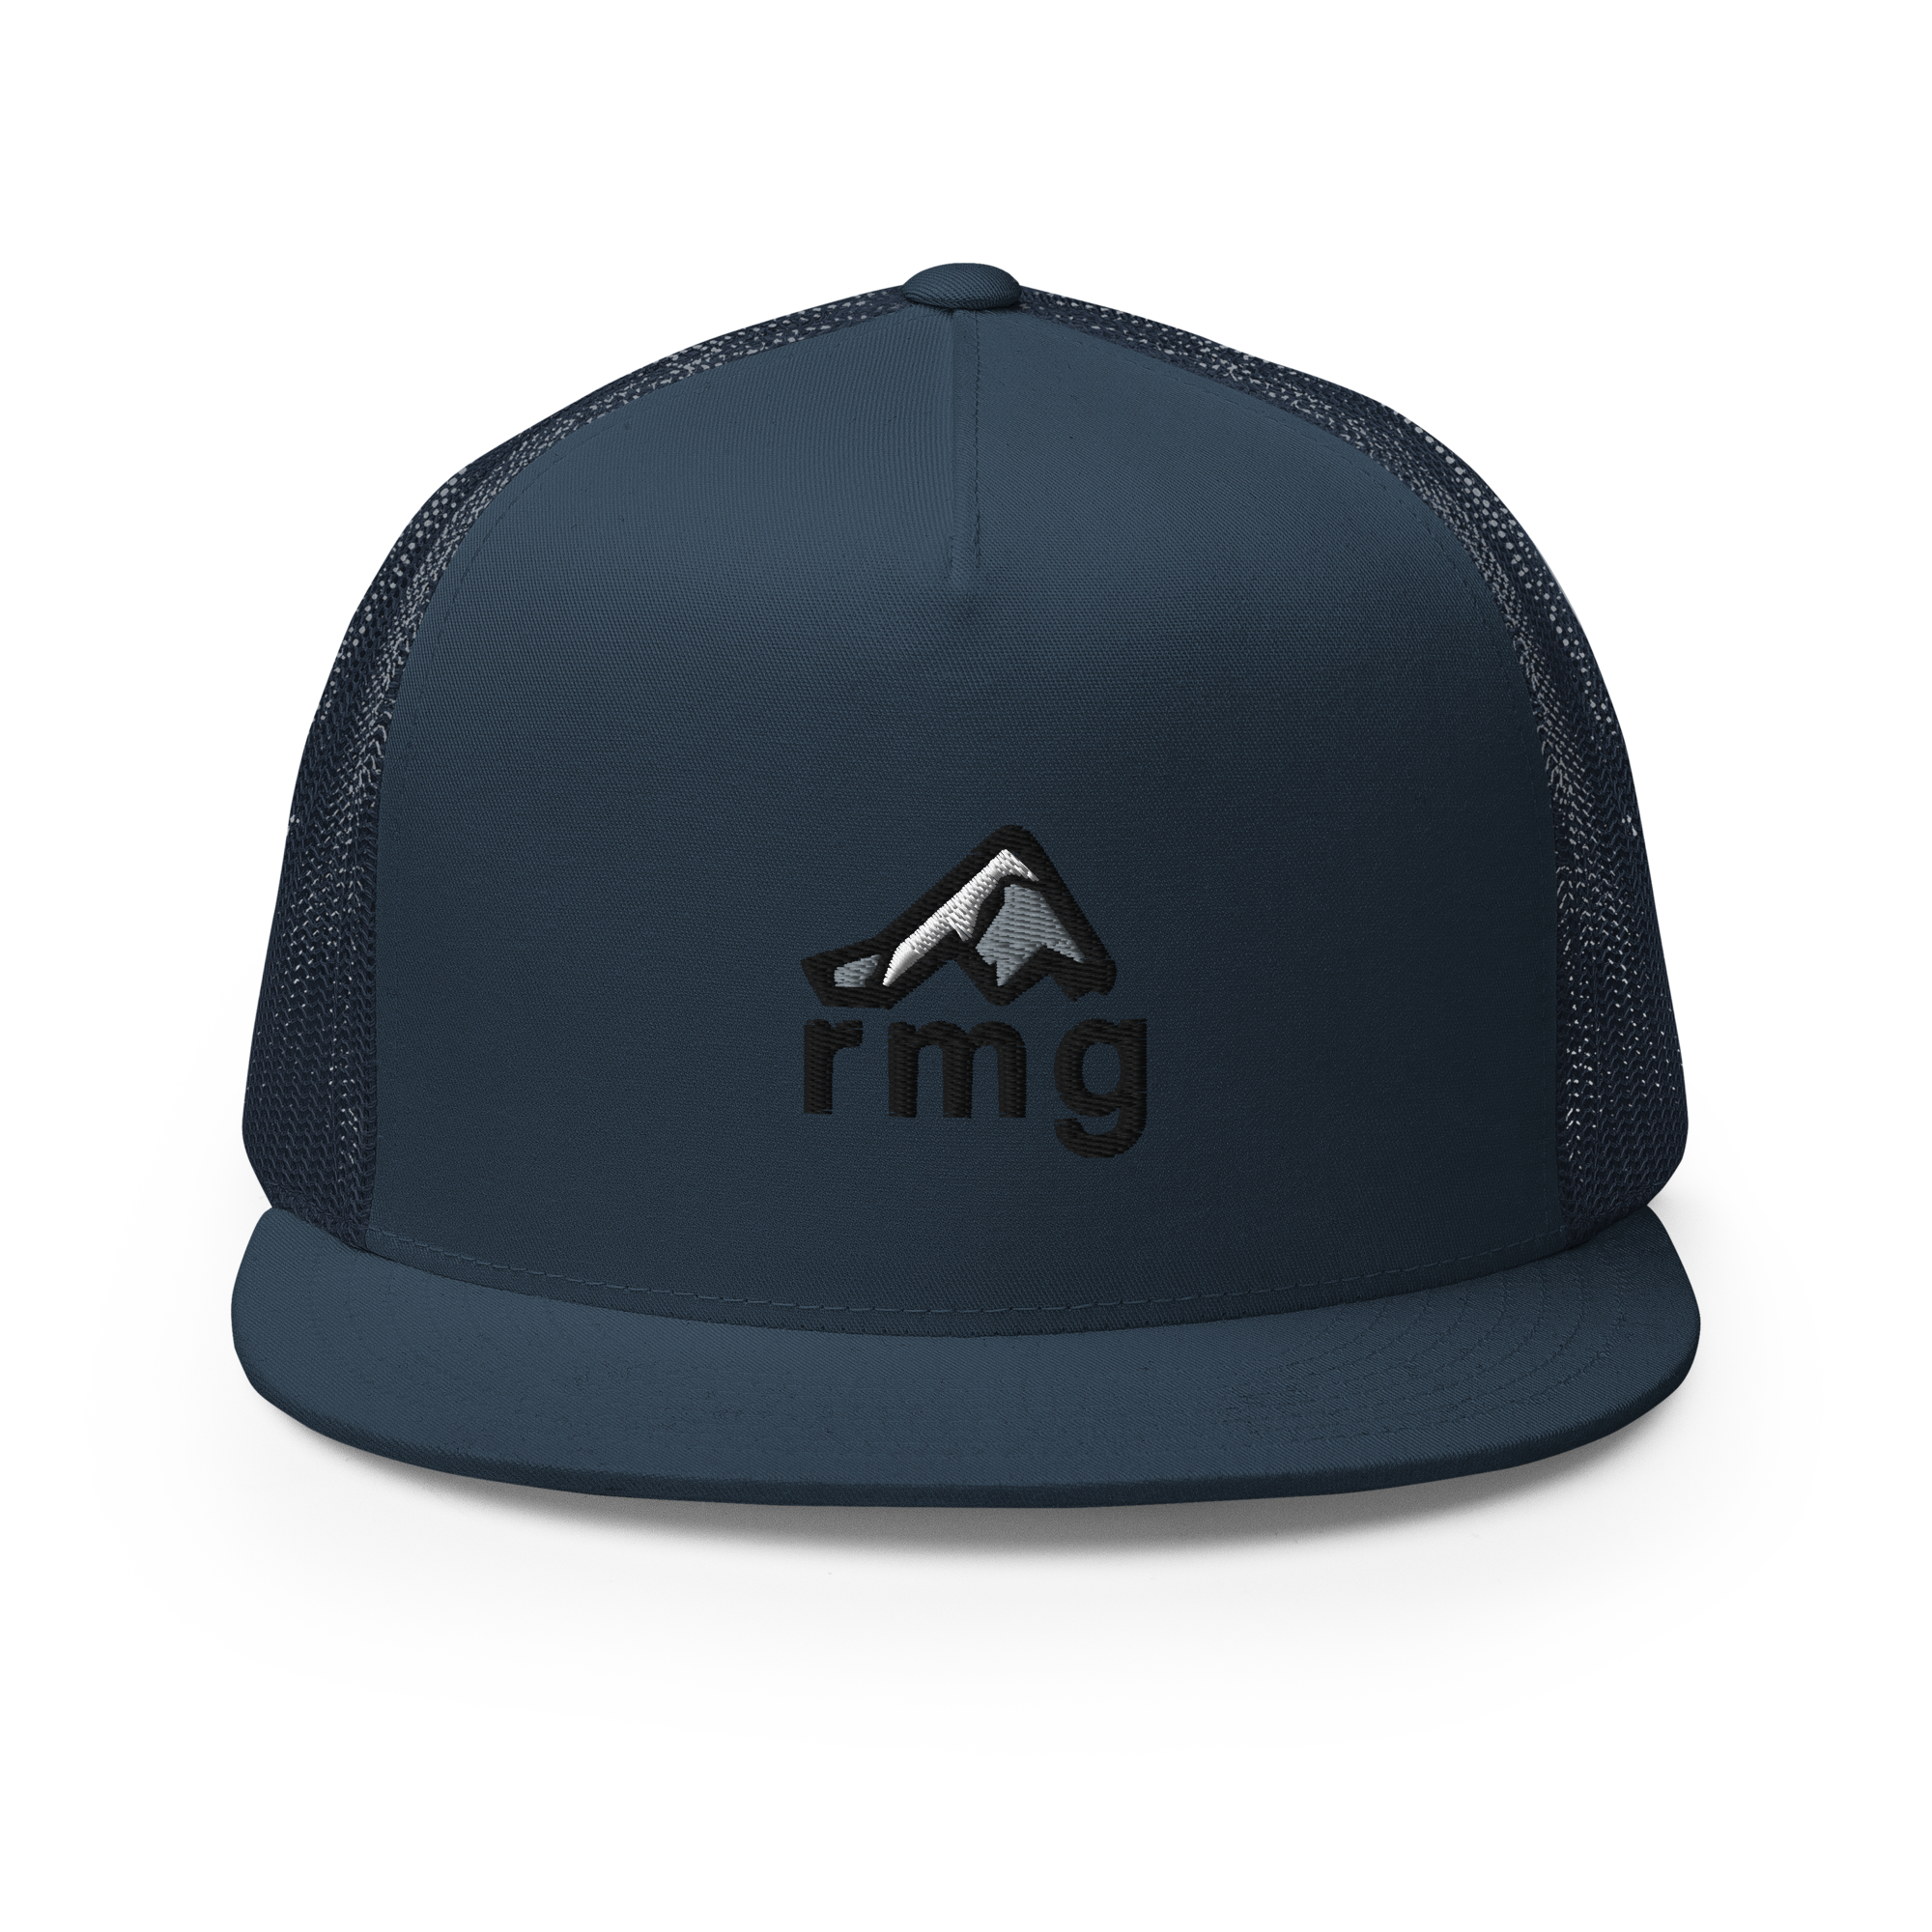 rmg snapback blue front view